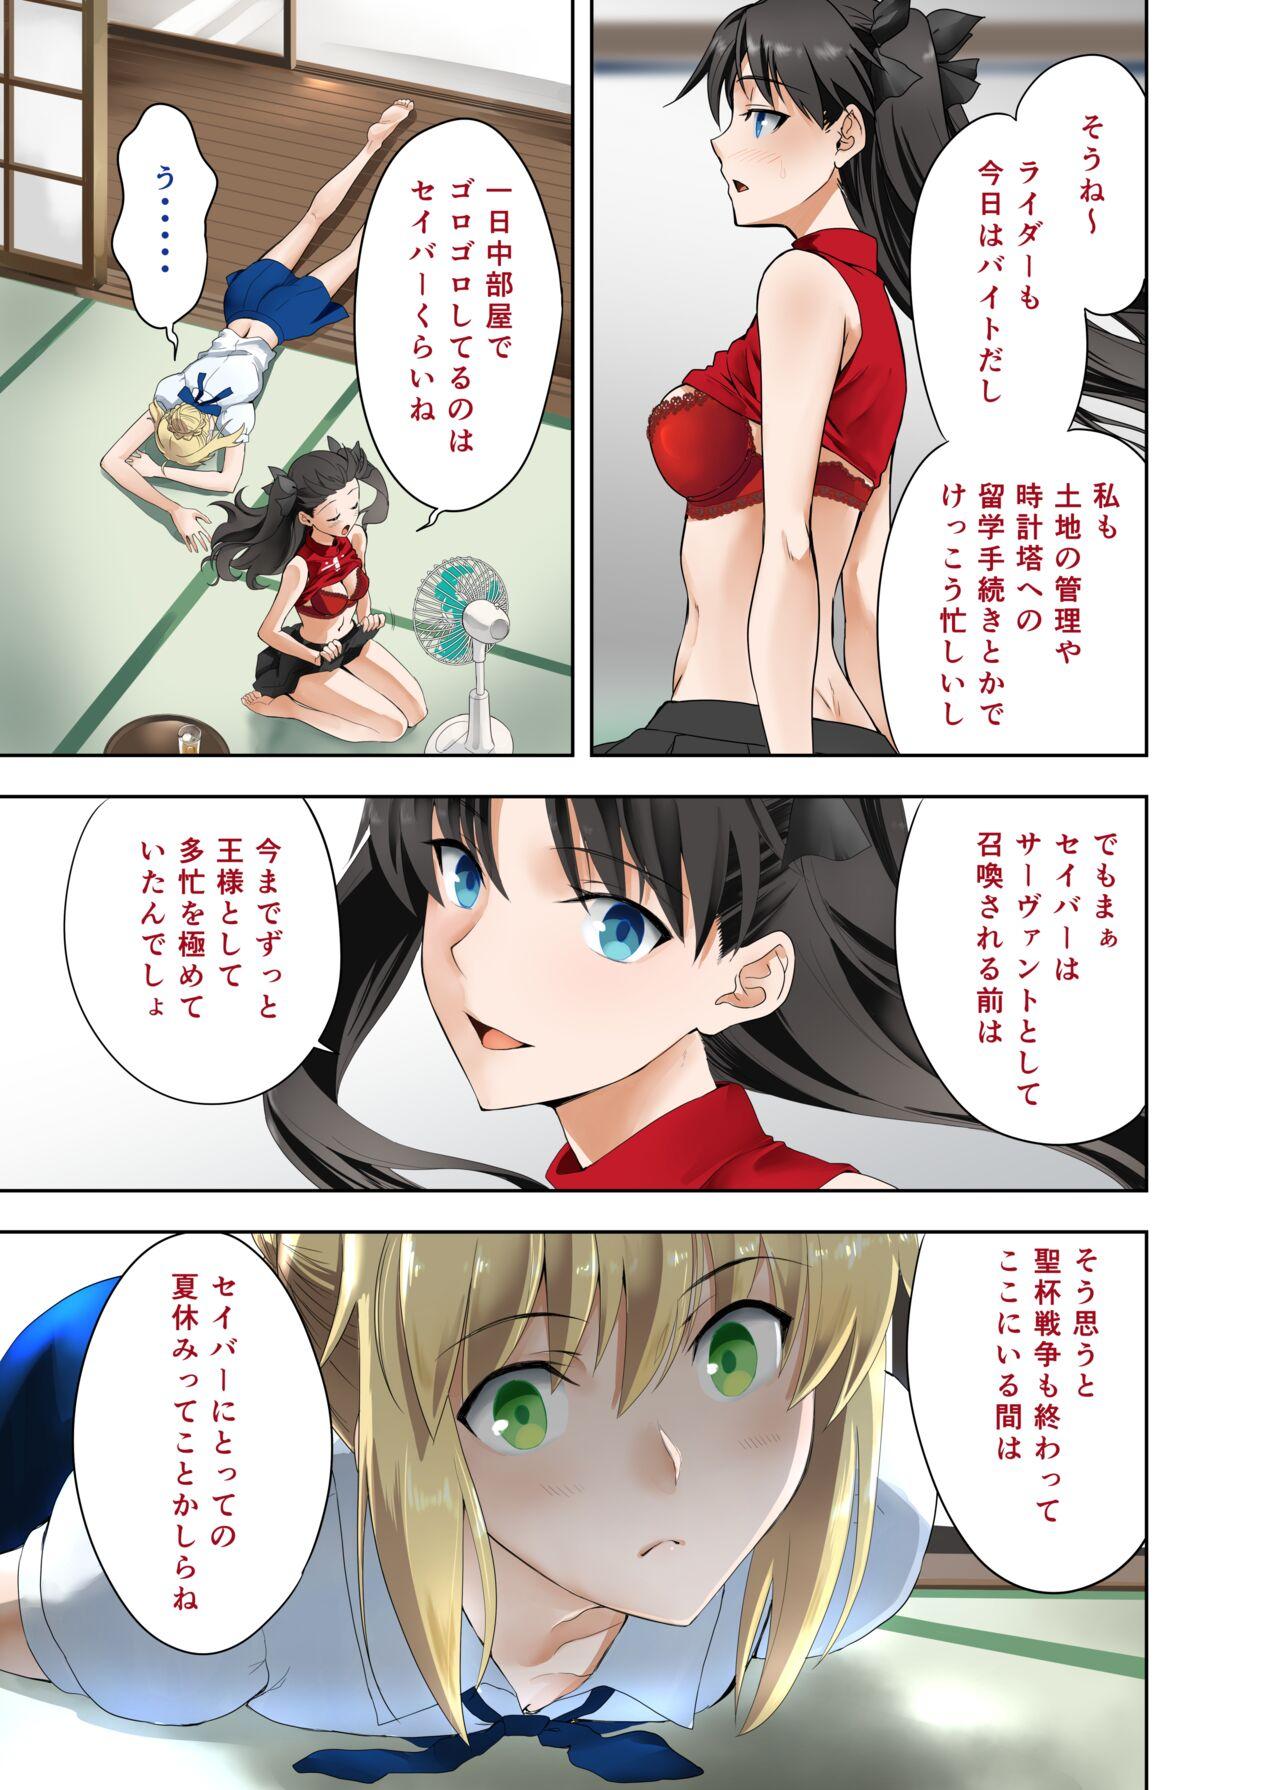 Emo Gay Saber's summer vacation - Fate stay night 18yo - Page 3